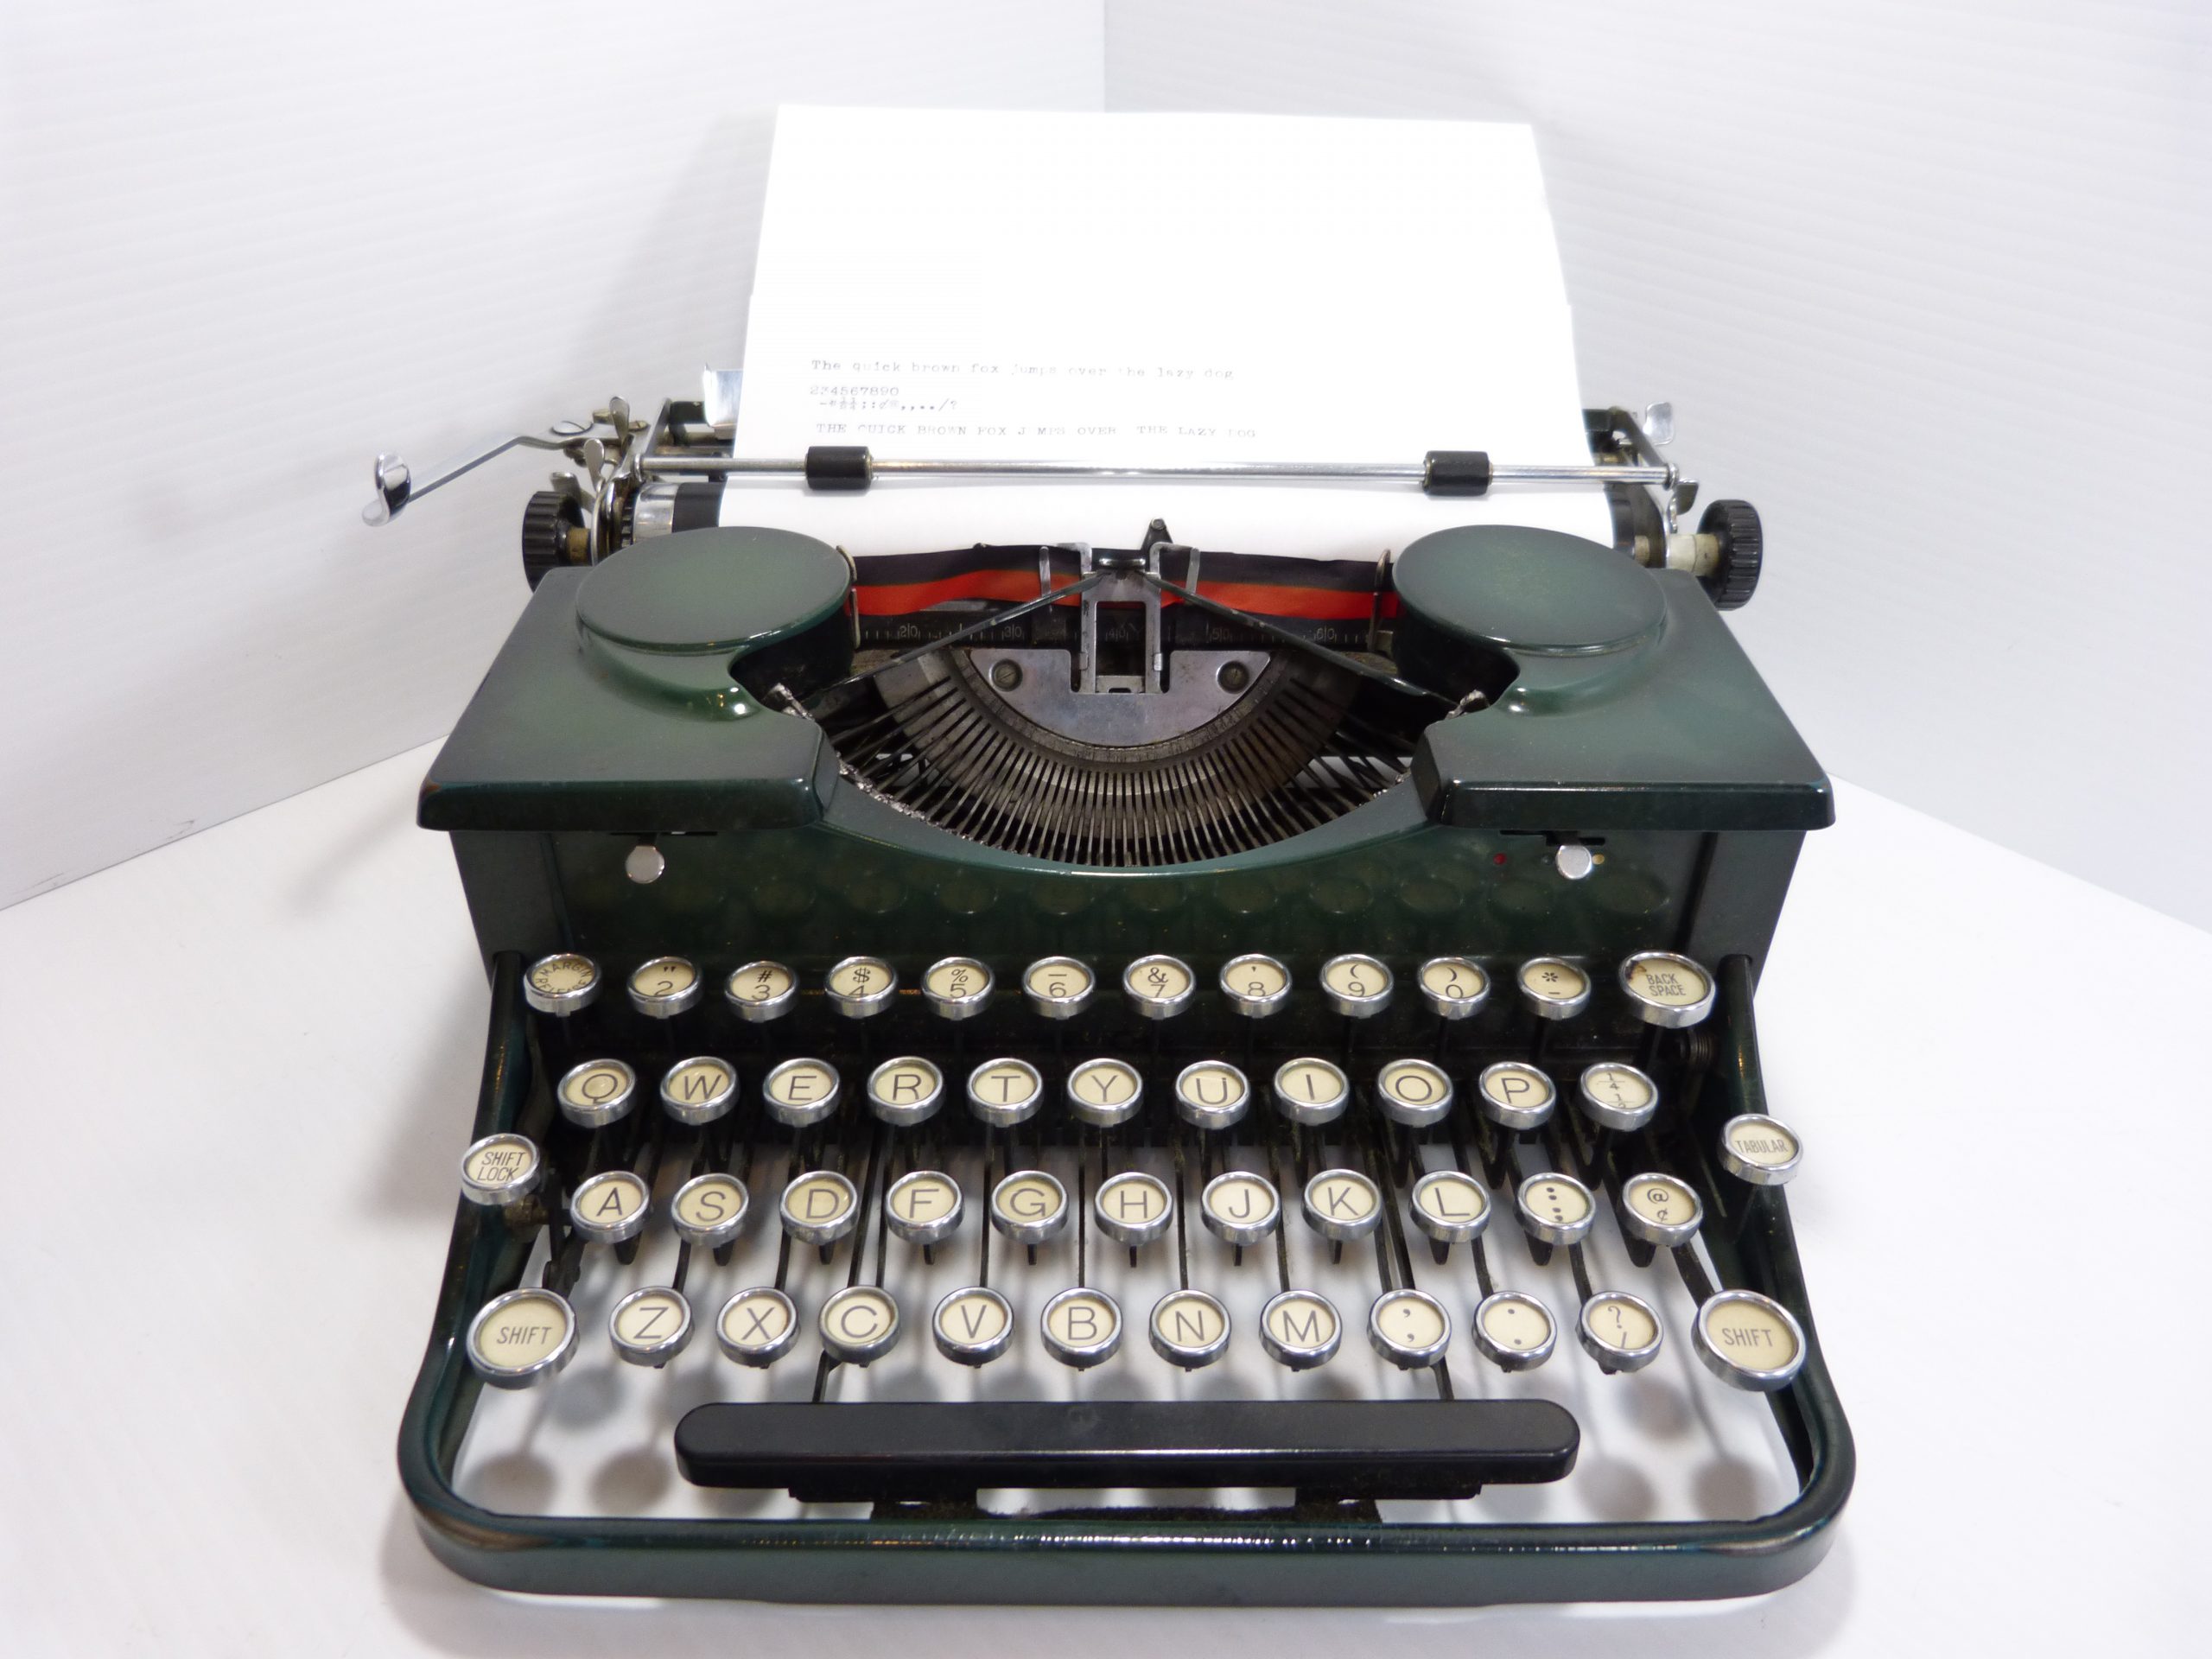 1934 Royal Model P Portable Proto-De-Luxe Typewriter With Case Serial A373466